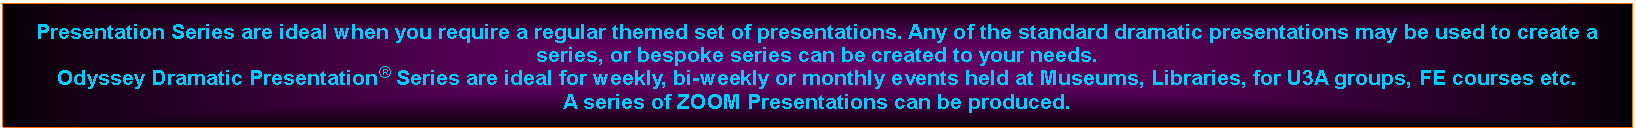 Text Box: Presentation Series are ideal when you require a regular themed set of presentations. Any of the standard dramatic presentations may be used to create a series, or bespoke series can be created to your needs.Odyssey Dramatic Presentation Series are ideal for weekly, bi-weekly or monthly events held at Museums, Libraries, for U3A groups, FE courses etc.A series of ZOOM Presentations can be produced.